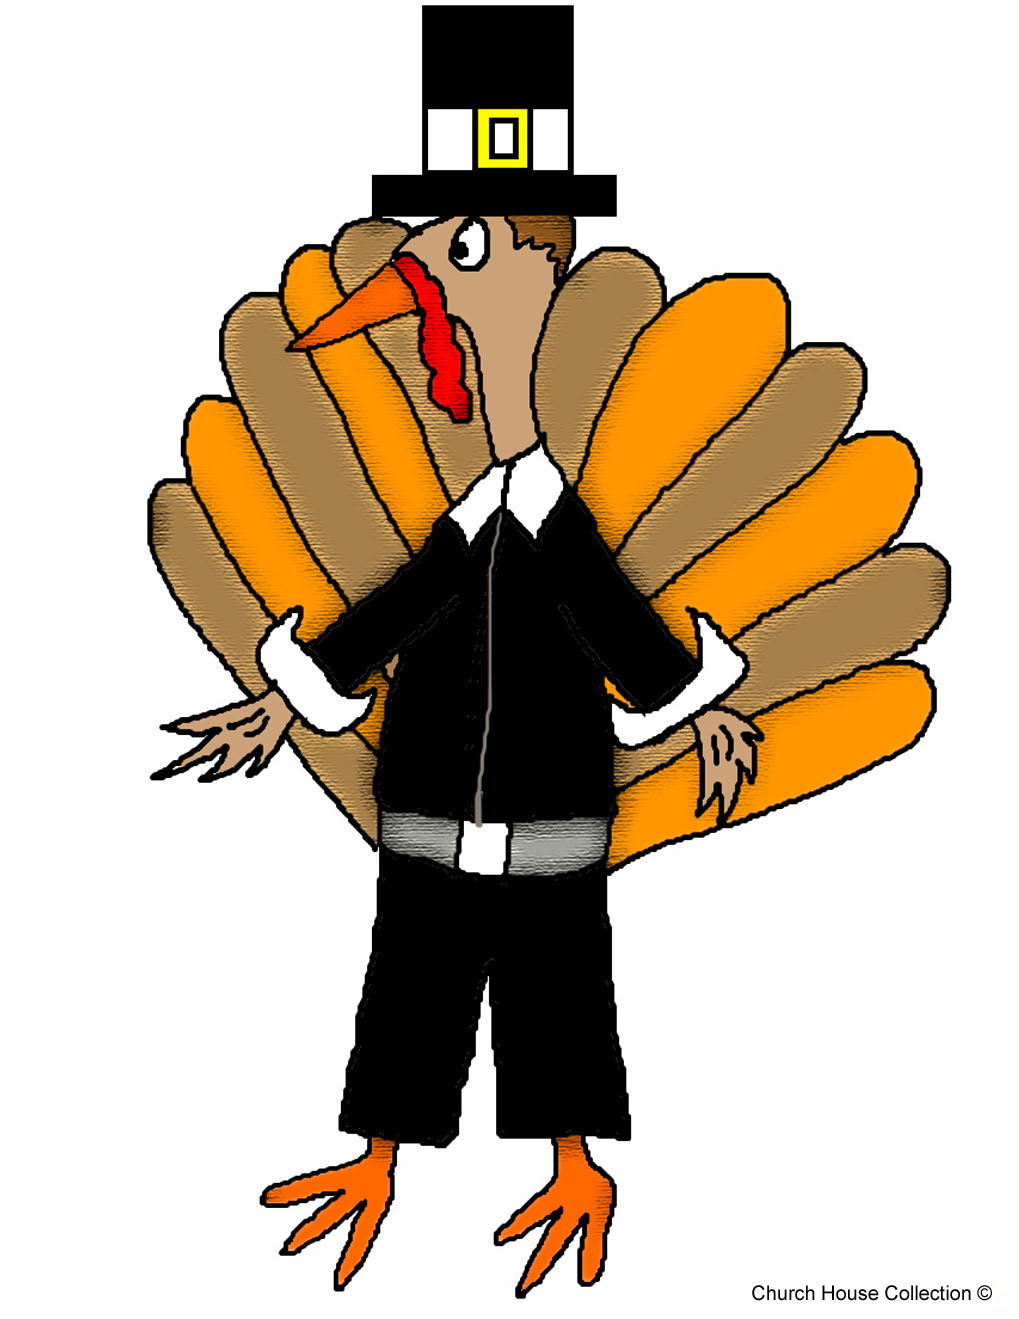 Free Thanksgiving Turkey Sunday School Lessons and Crafts for Childrens For Preschool Kids by Church House Collection- Turkey Wearing Pilgrim Hat and Outfit Clipart Cartoon